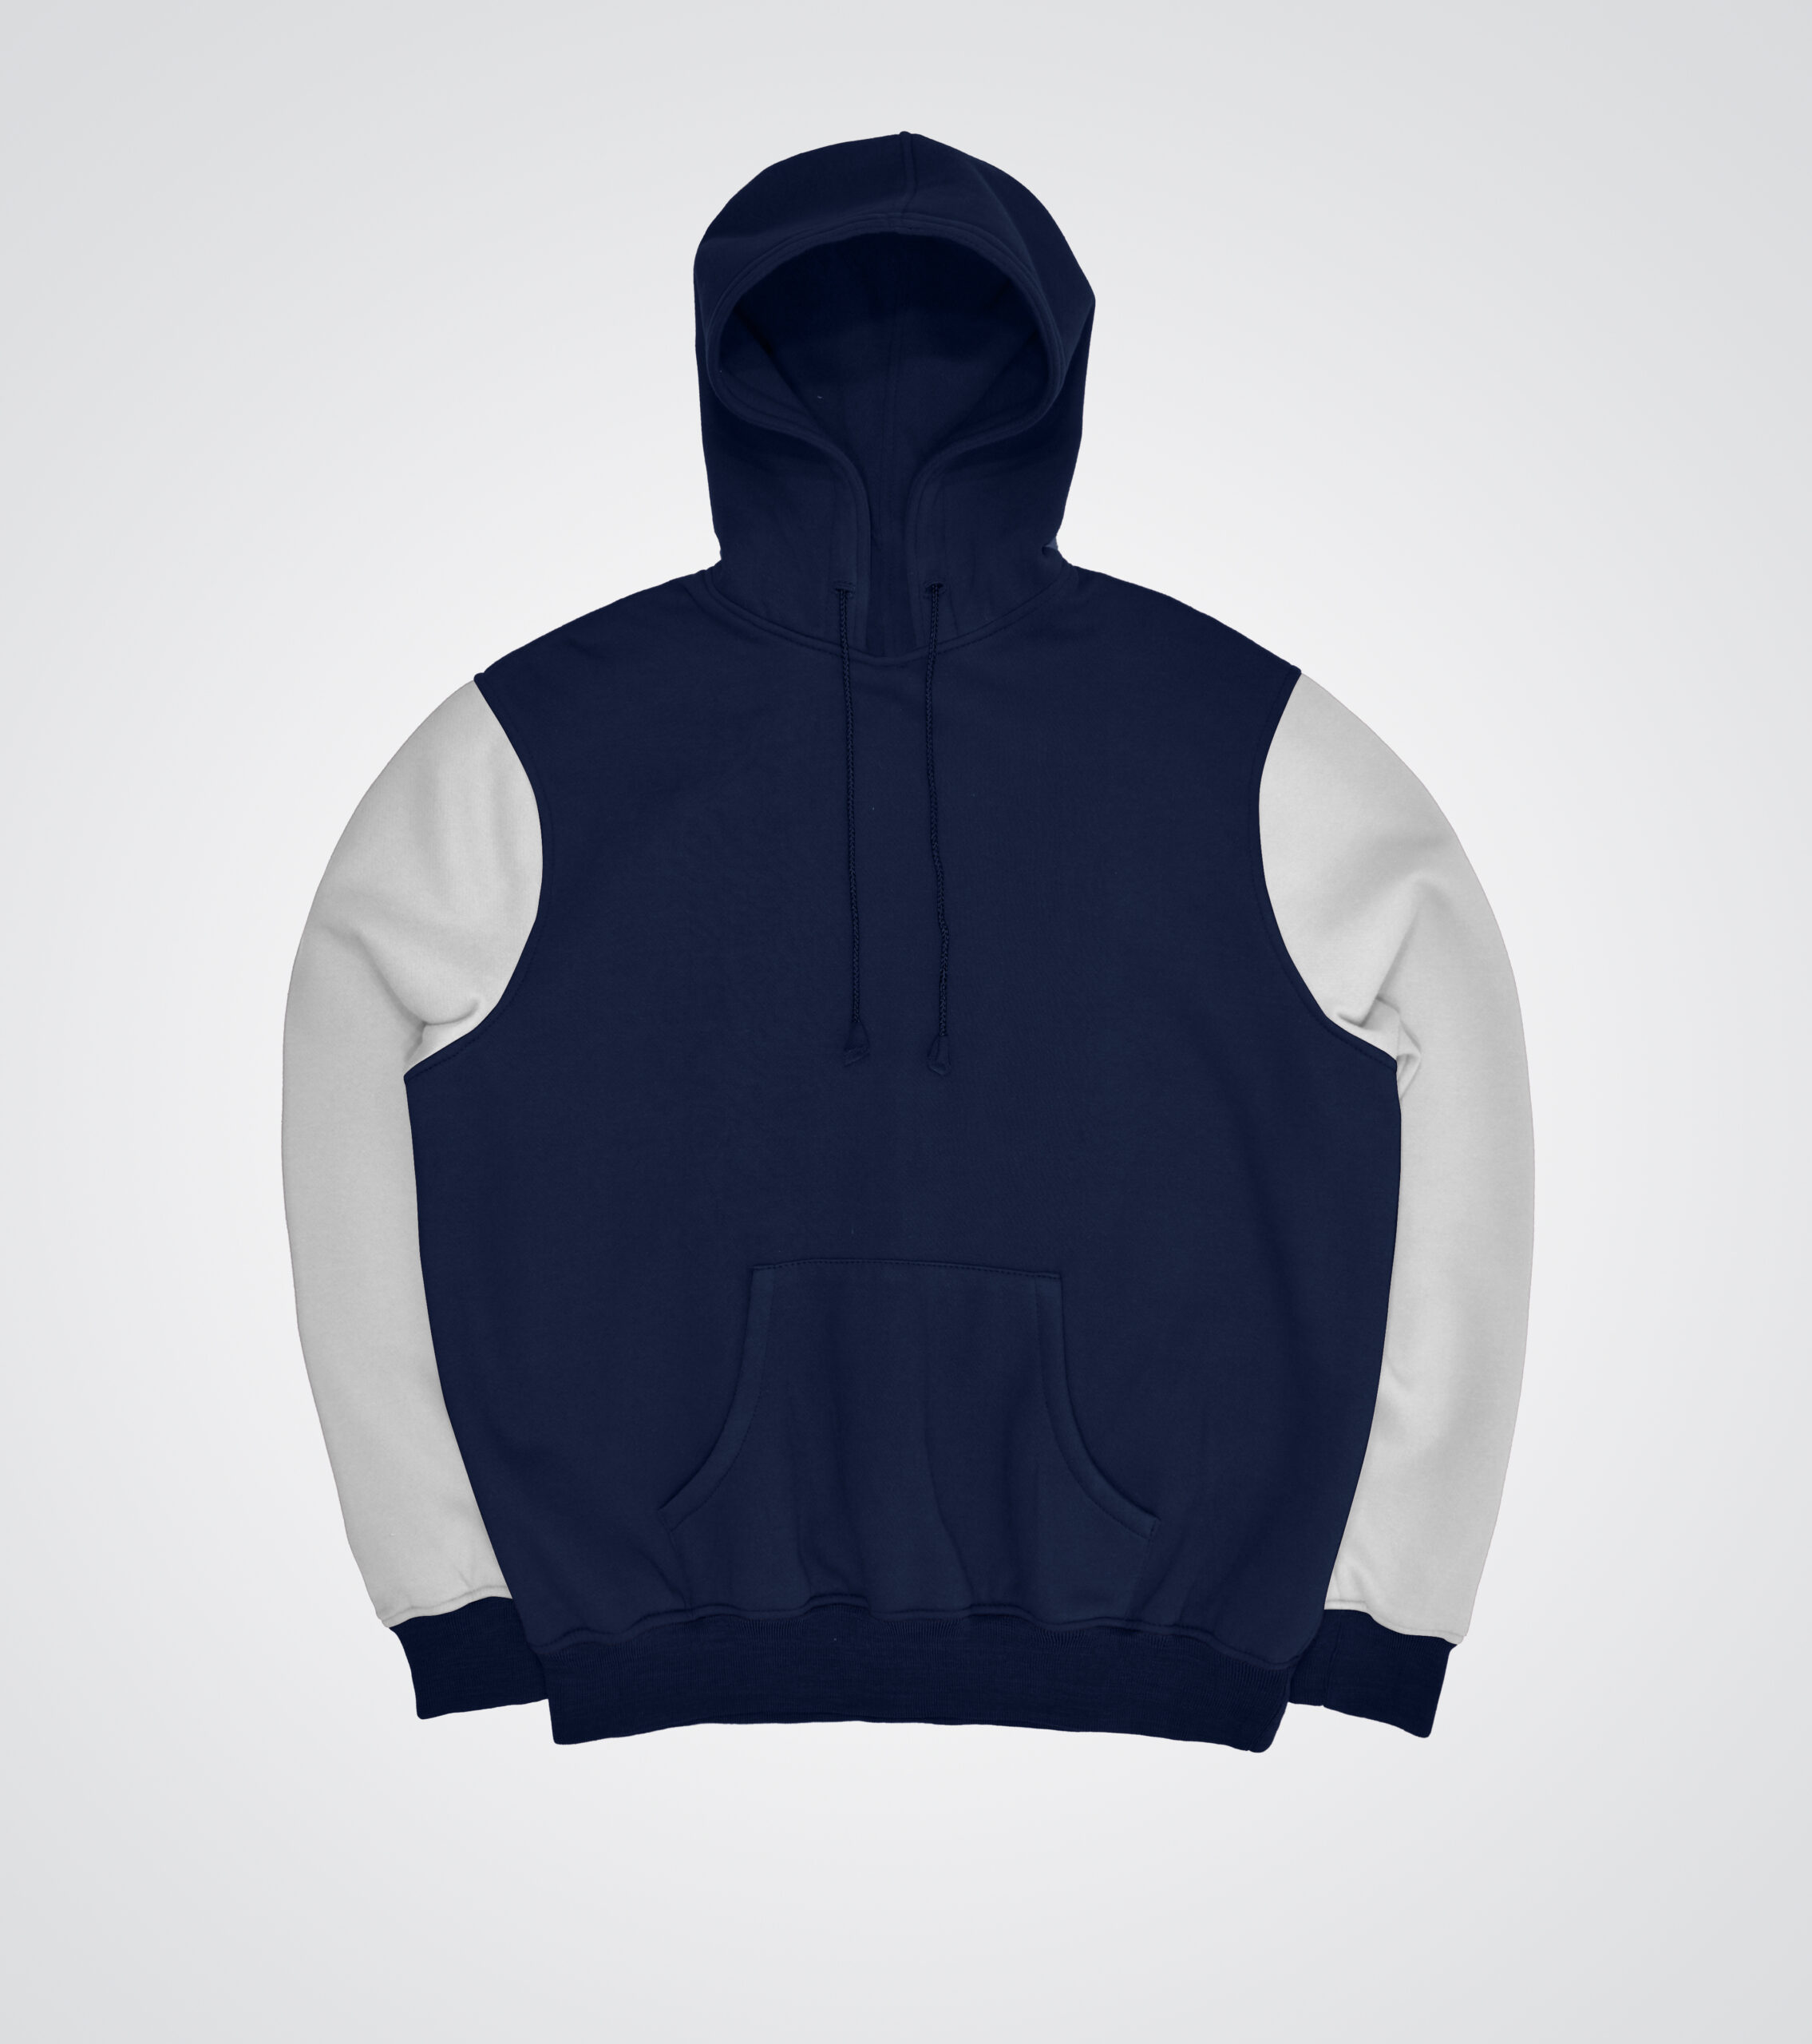 Navy Blue and White Unisex Pullover Hoodie